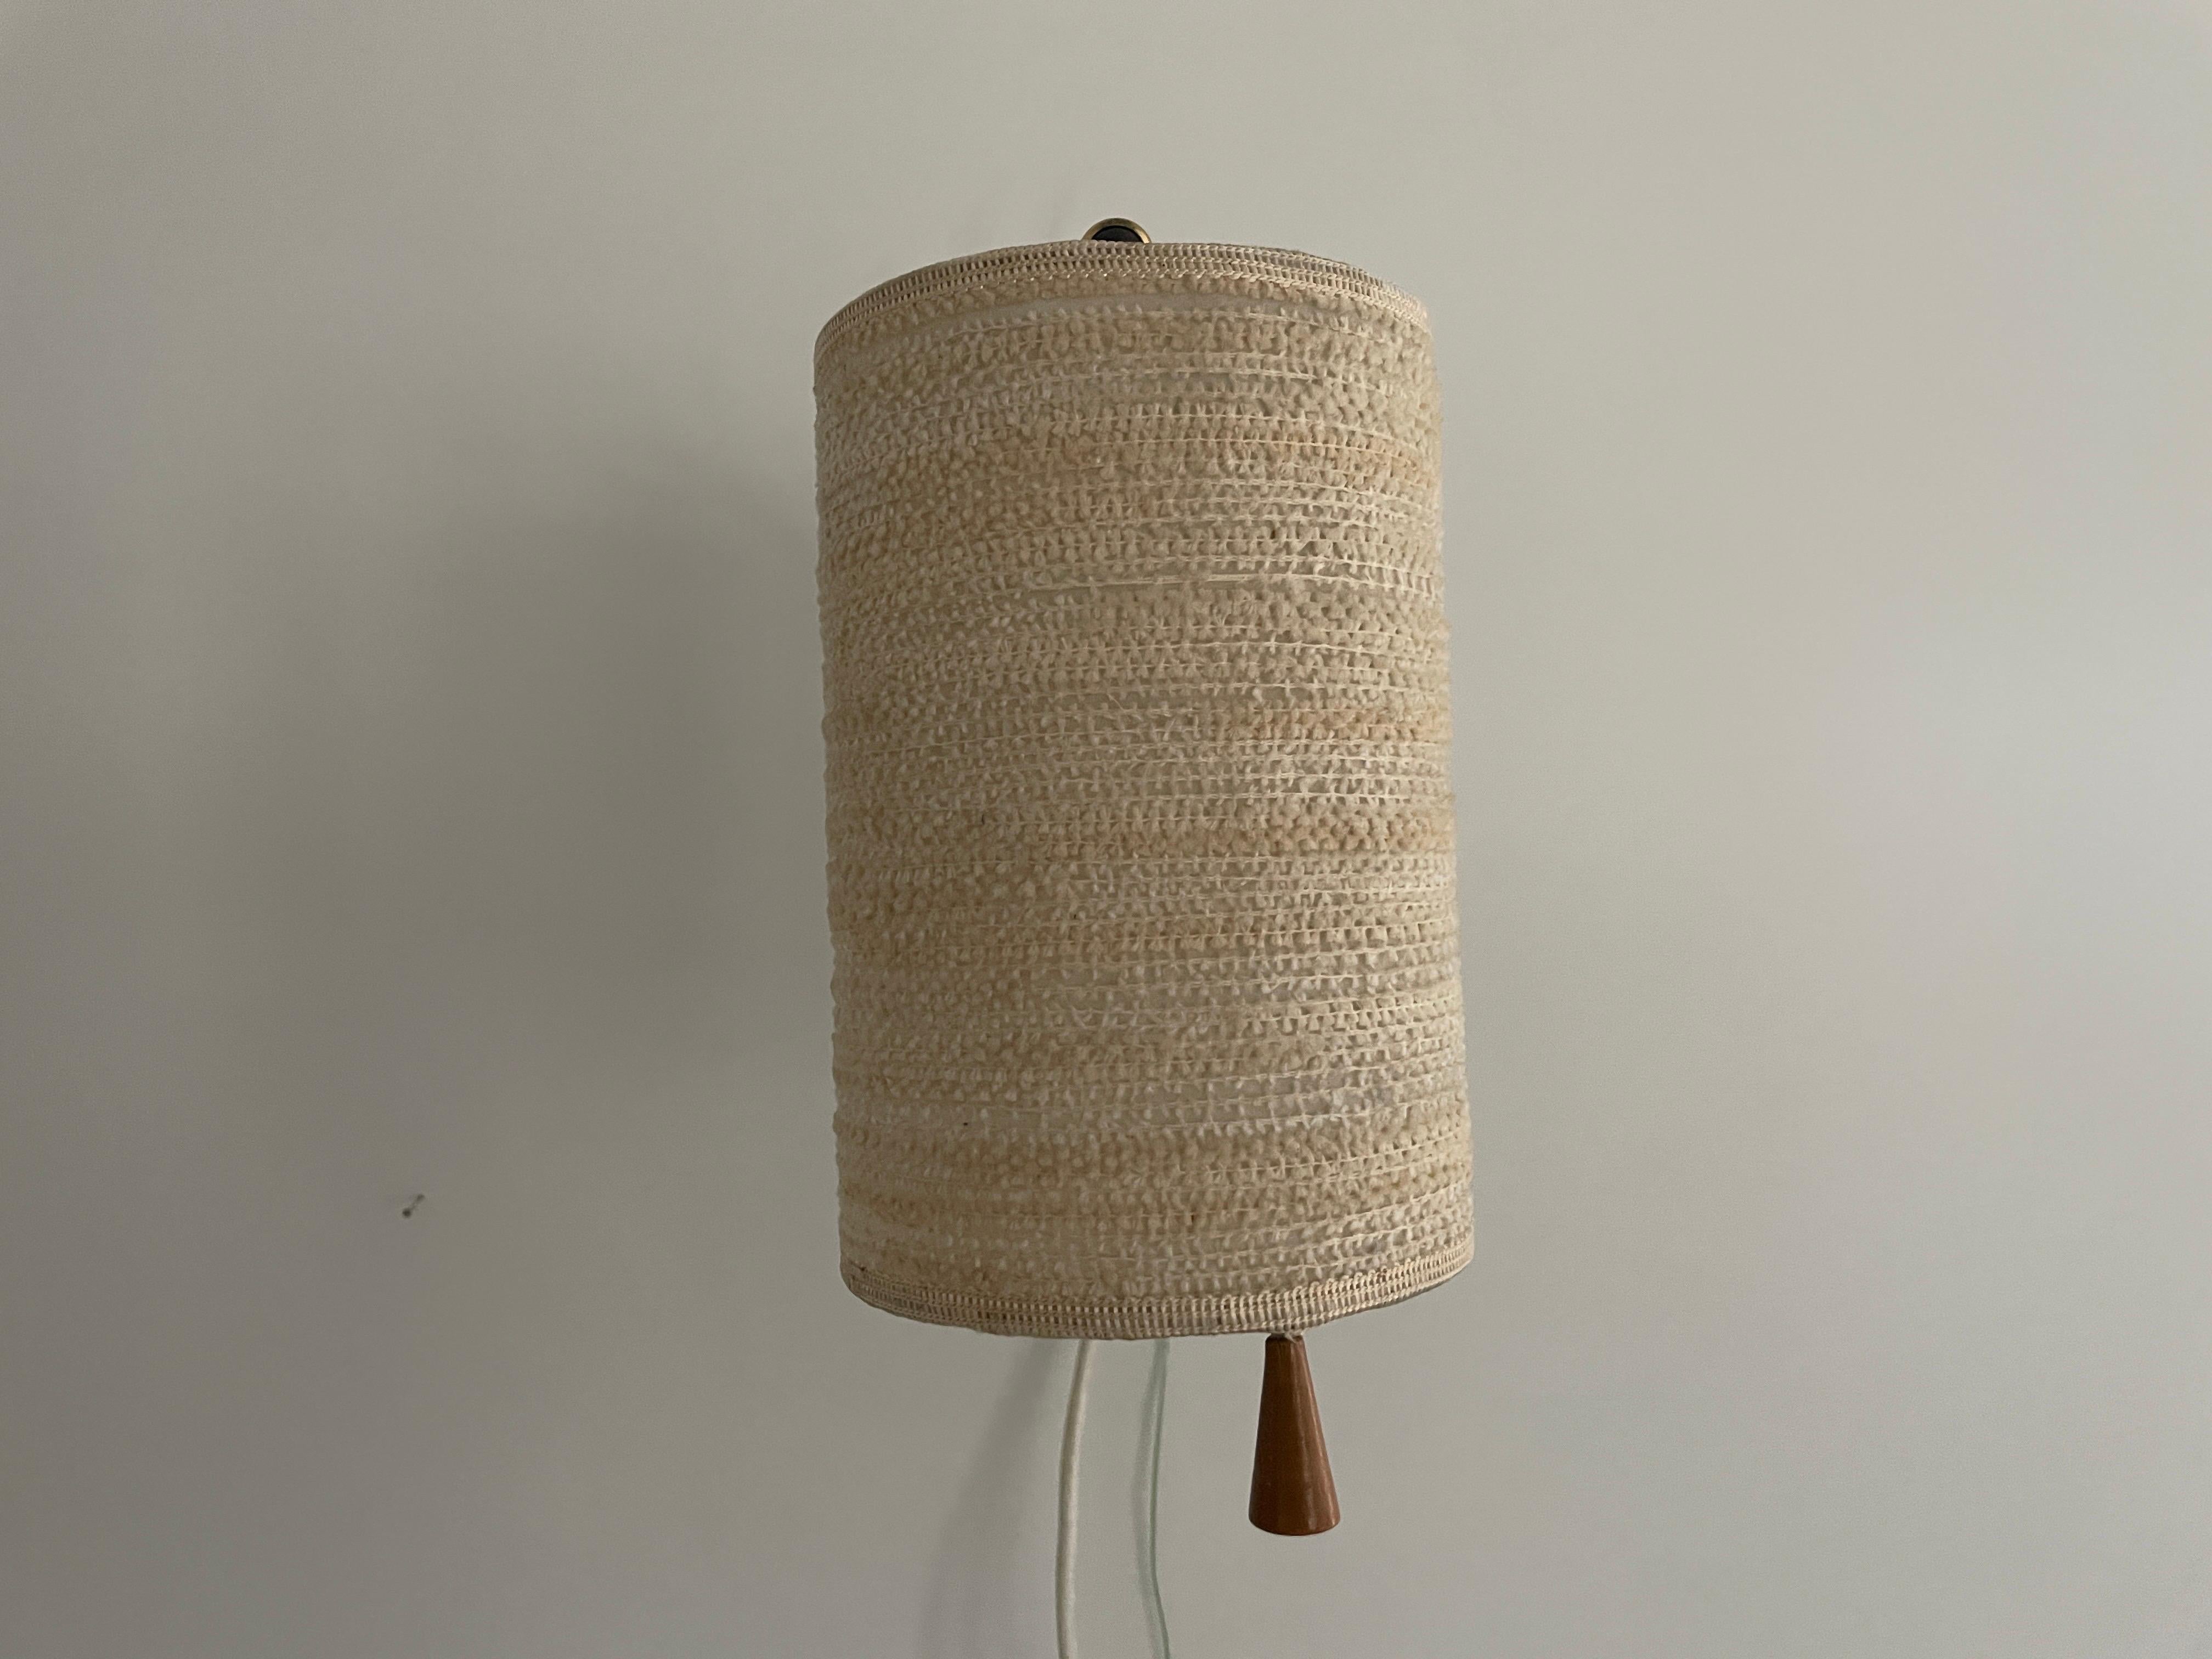 Mid-Century Modern Fabric Shade and Wood Wall Lamp with Brass Neck, 1960s, Germany For Sale